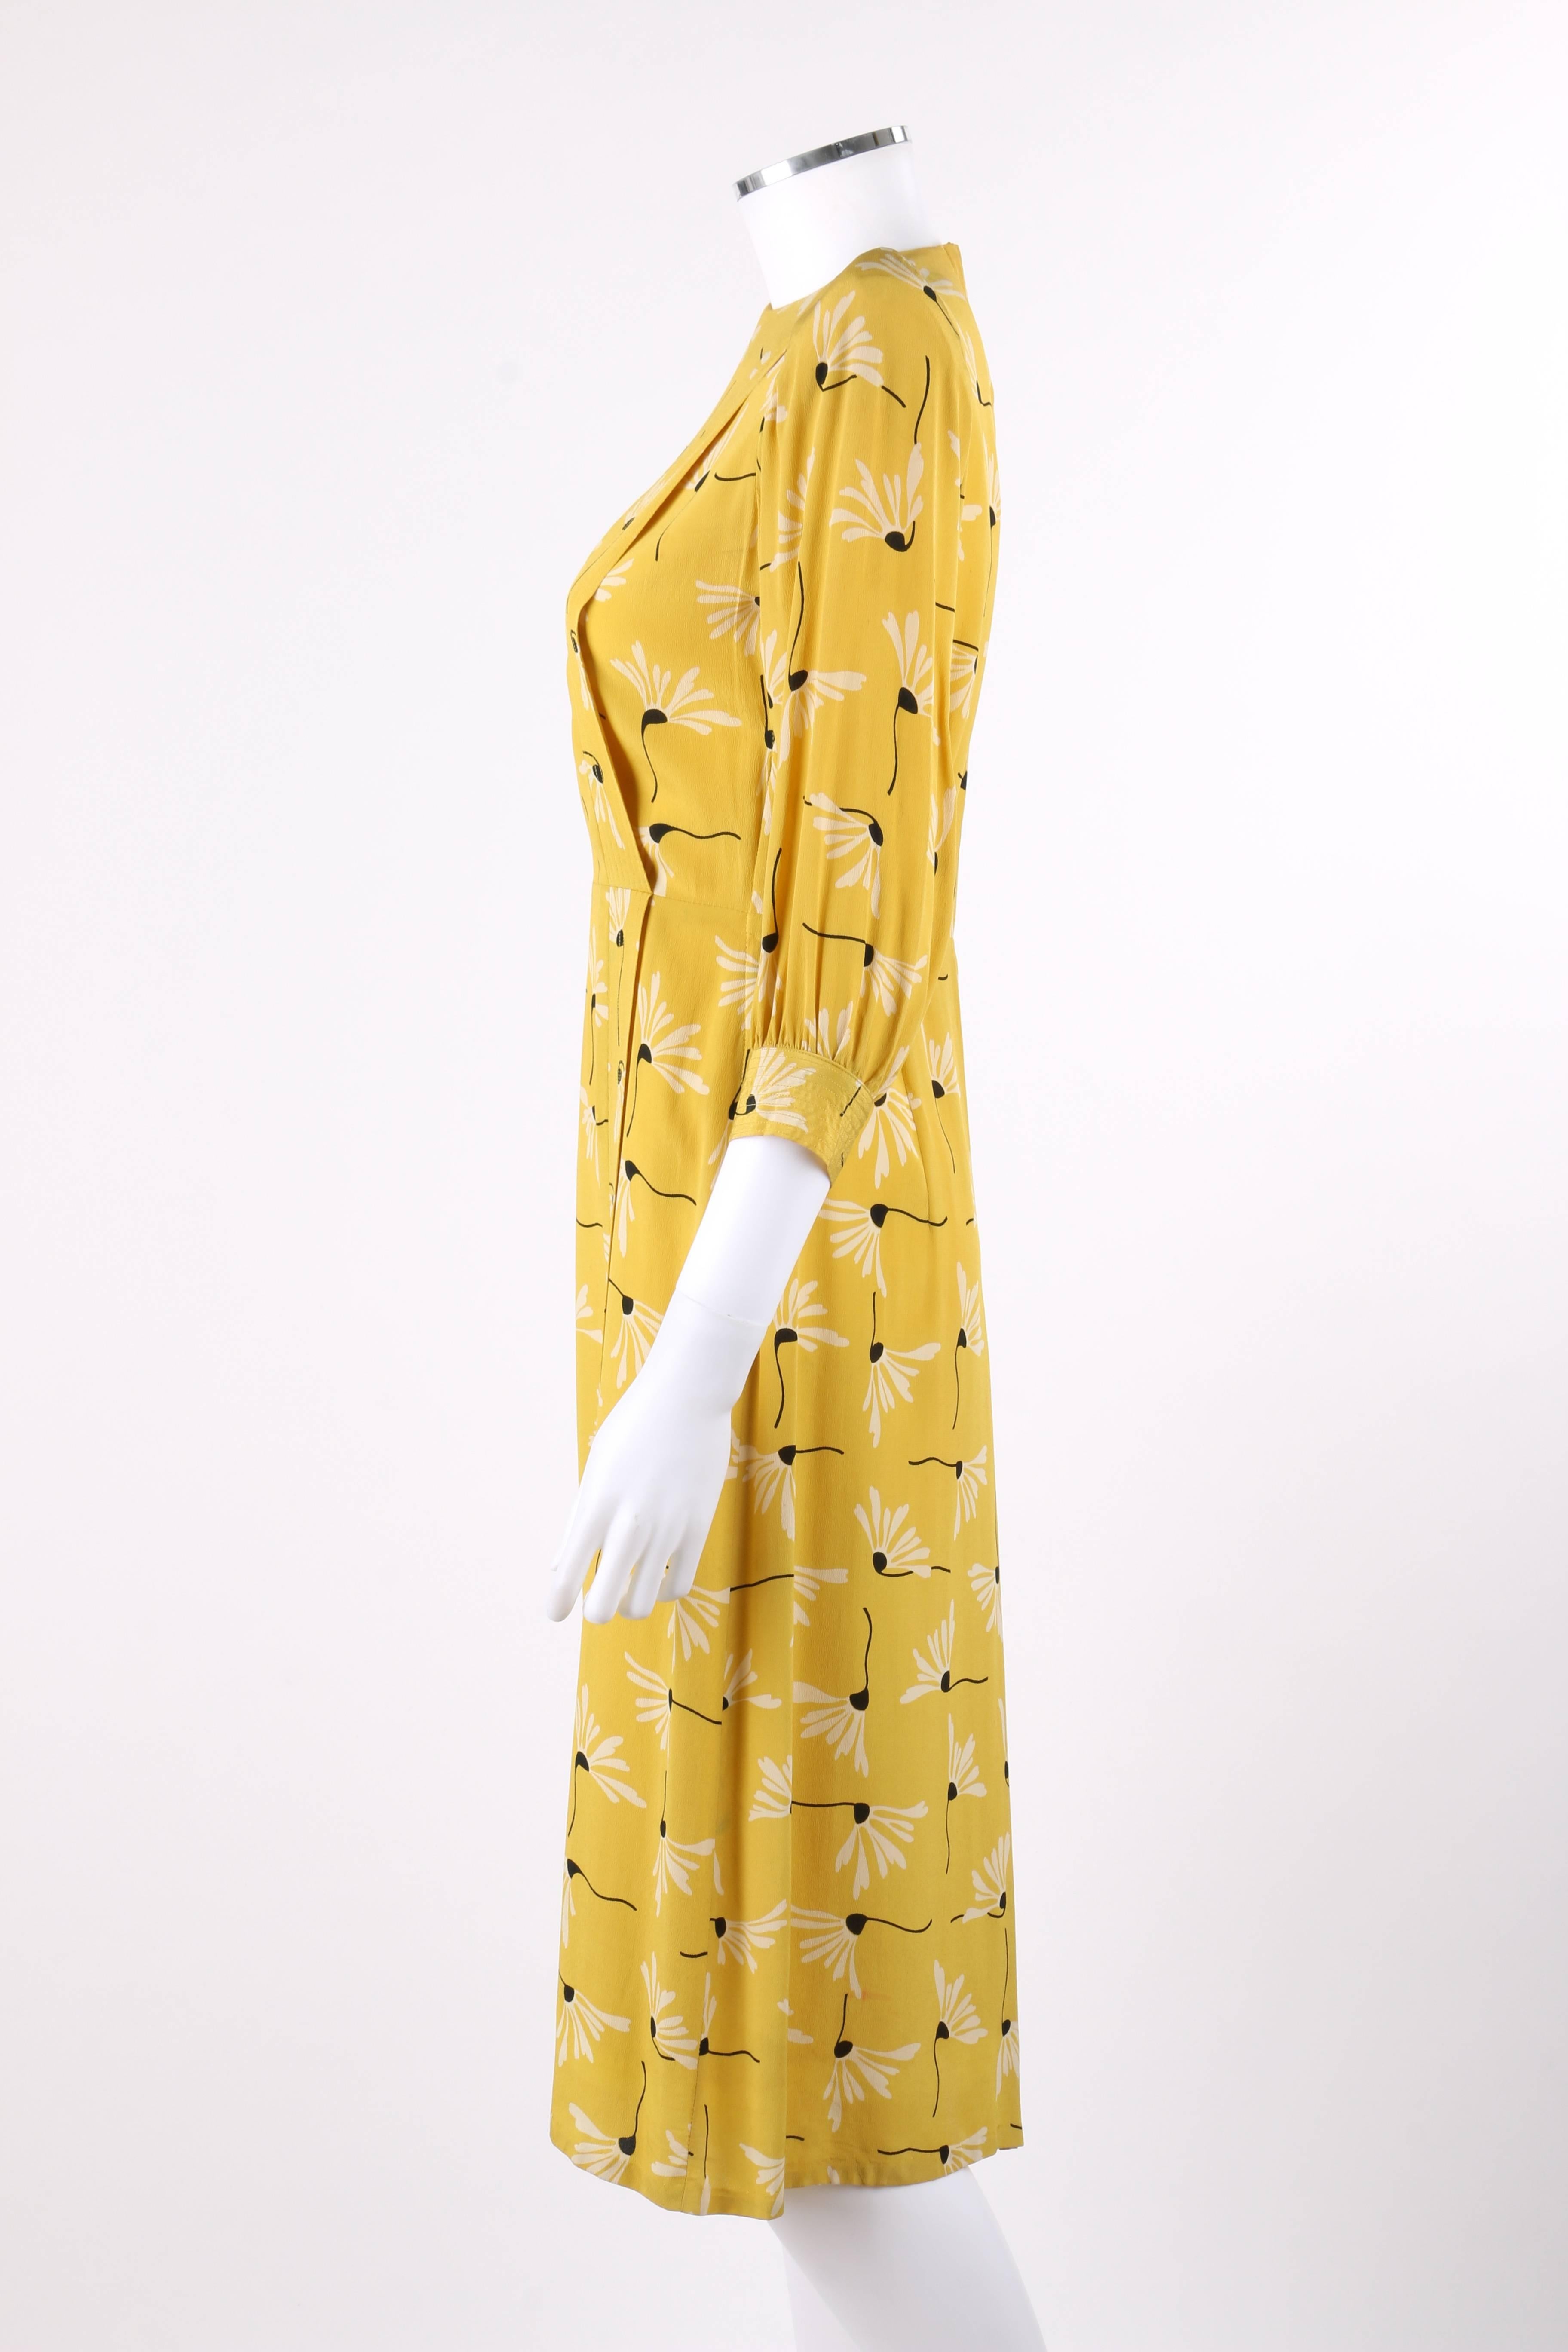 SERGEE OF CALIFORNIA c.1940's Yellow Daisy Floral Print Rayon Crepe Day Dress In Good Condition For Sale In Thiensville, WI